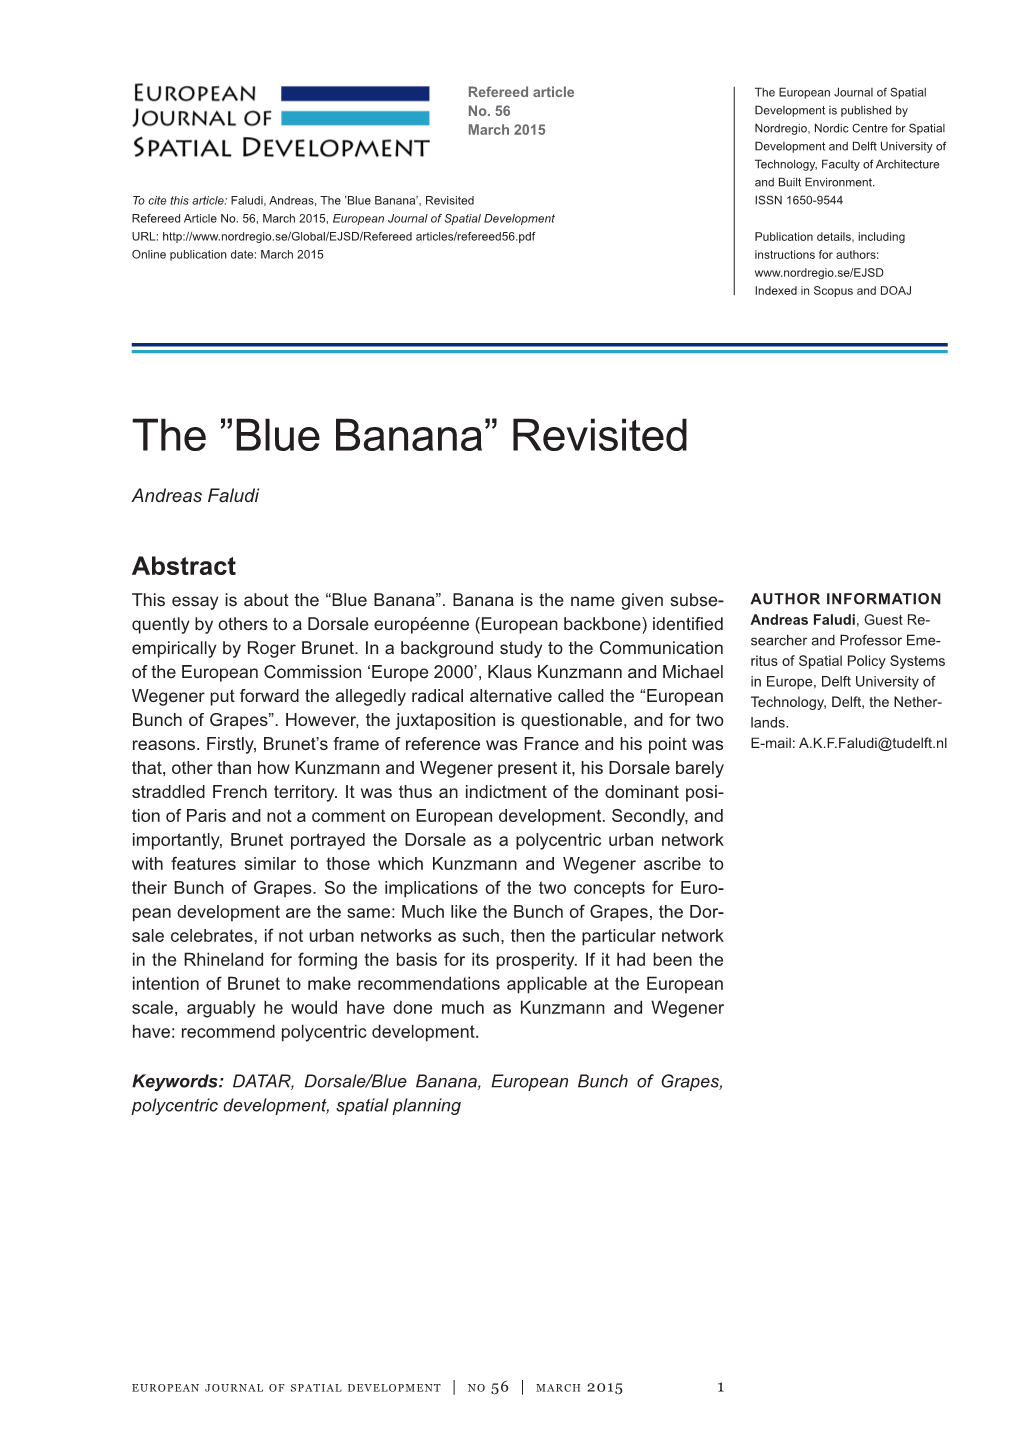 Blue Banana’, Revisited ISSN 1650-9544 Refereed Article No